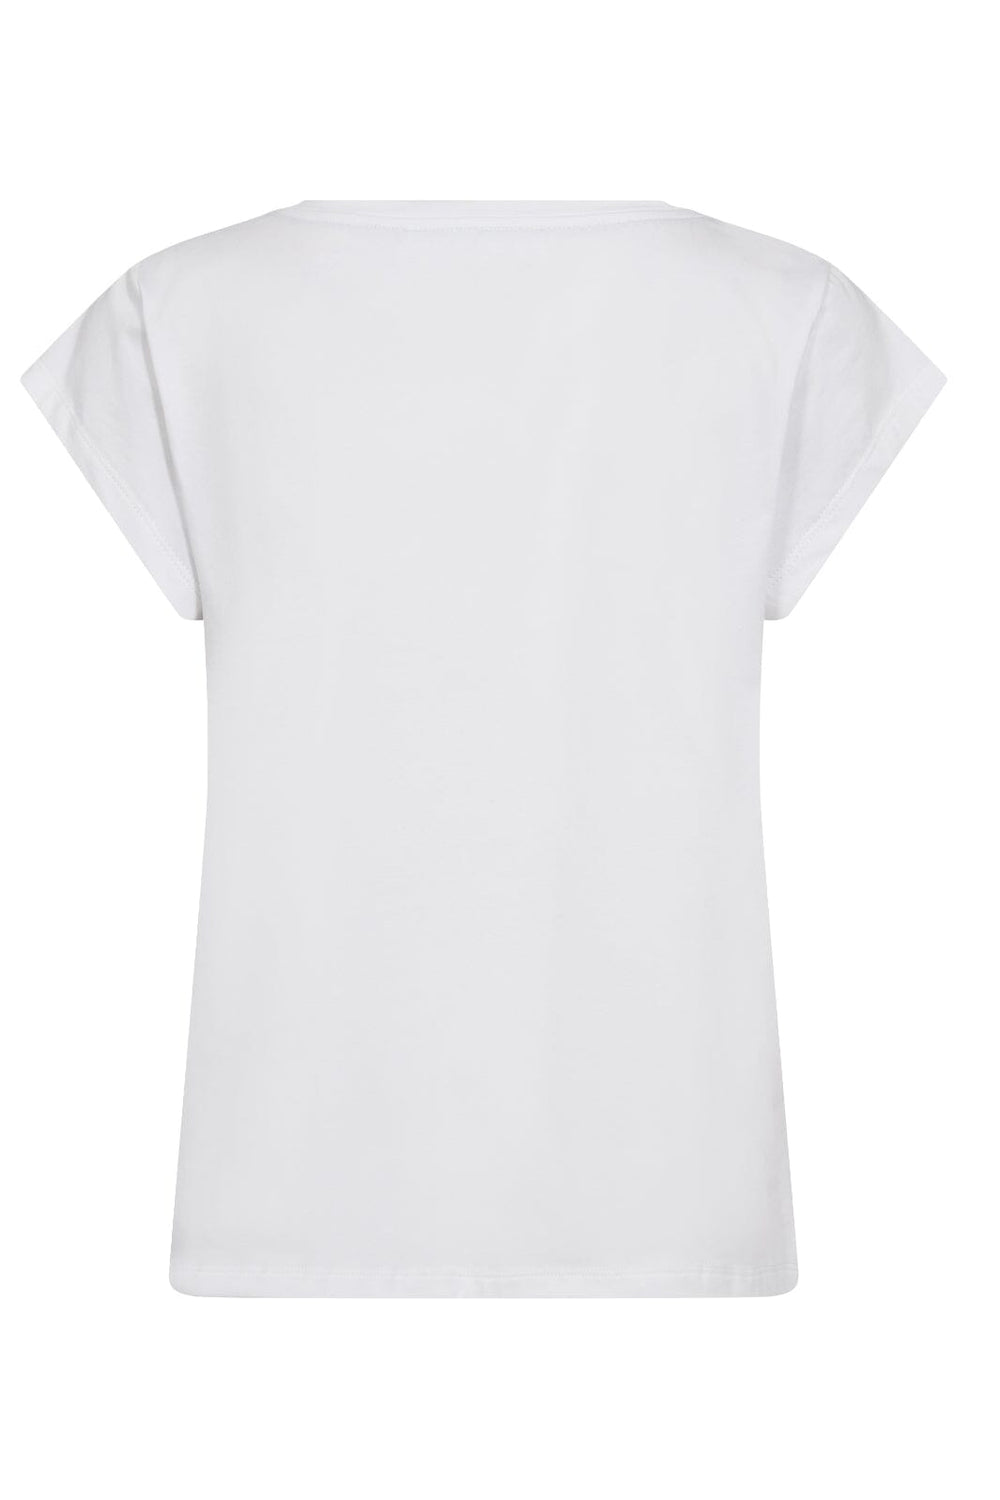 Forudbestilling - Co´couture - Zebracc Coco Tee 33120 - 4000 White T-shirts 